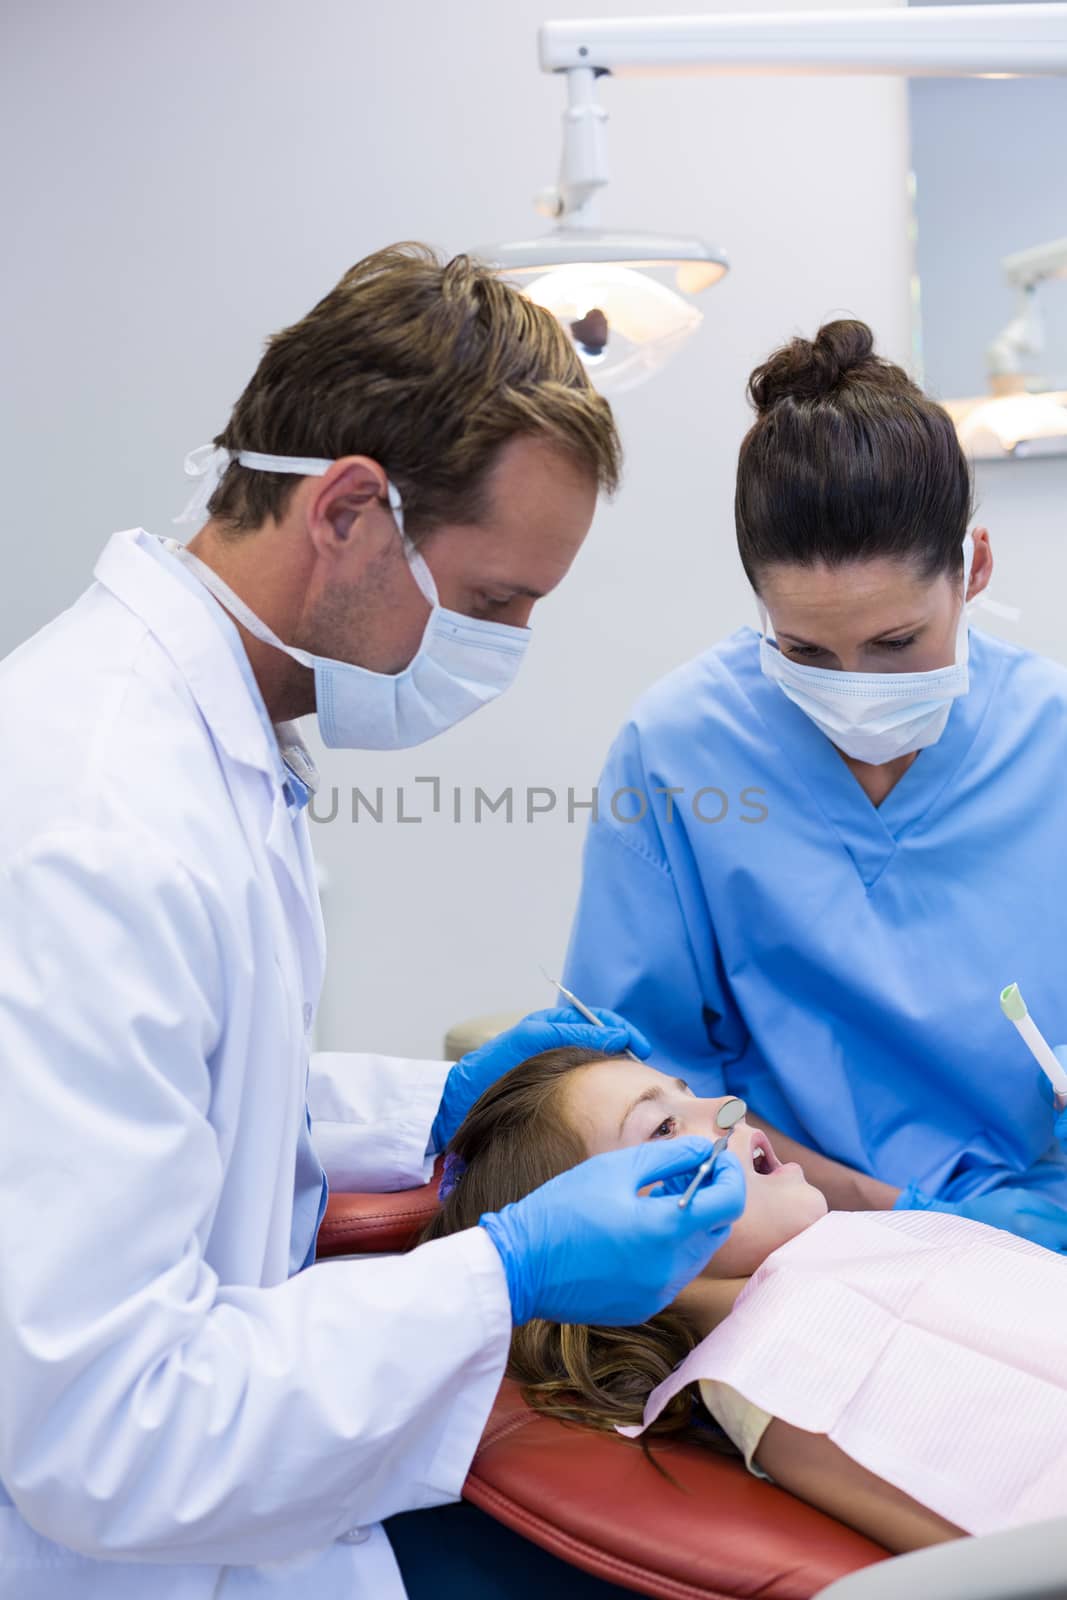 Dentist examining a young patient with tools by Wavebreakmedia